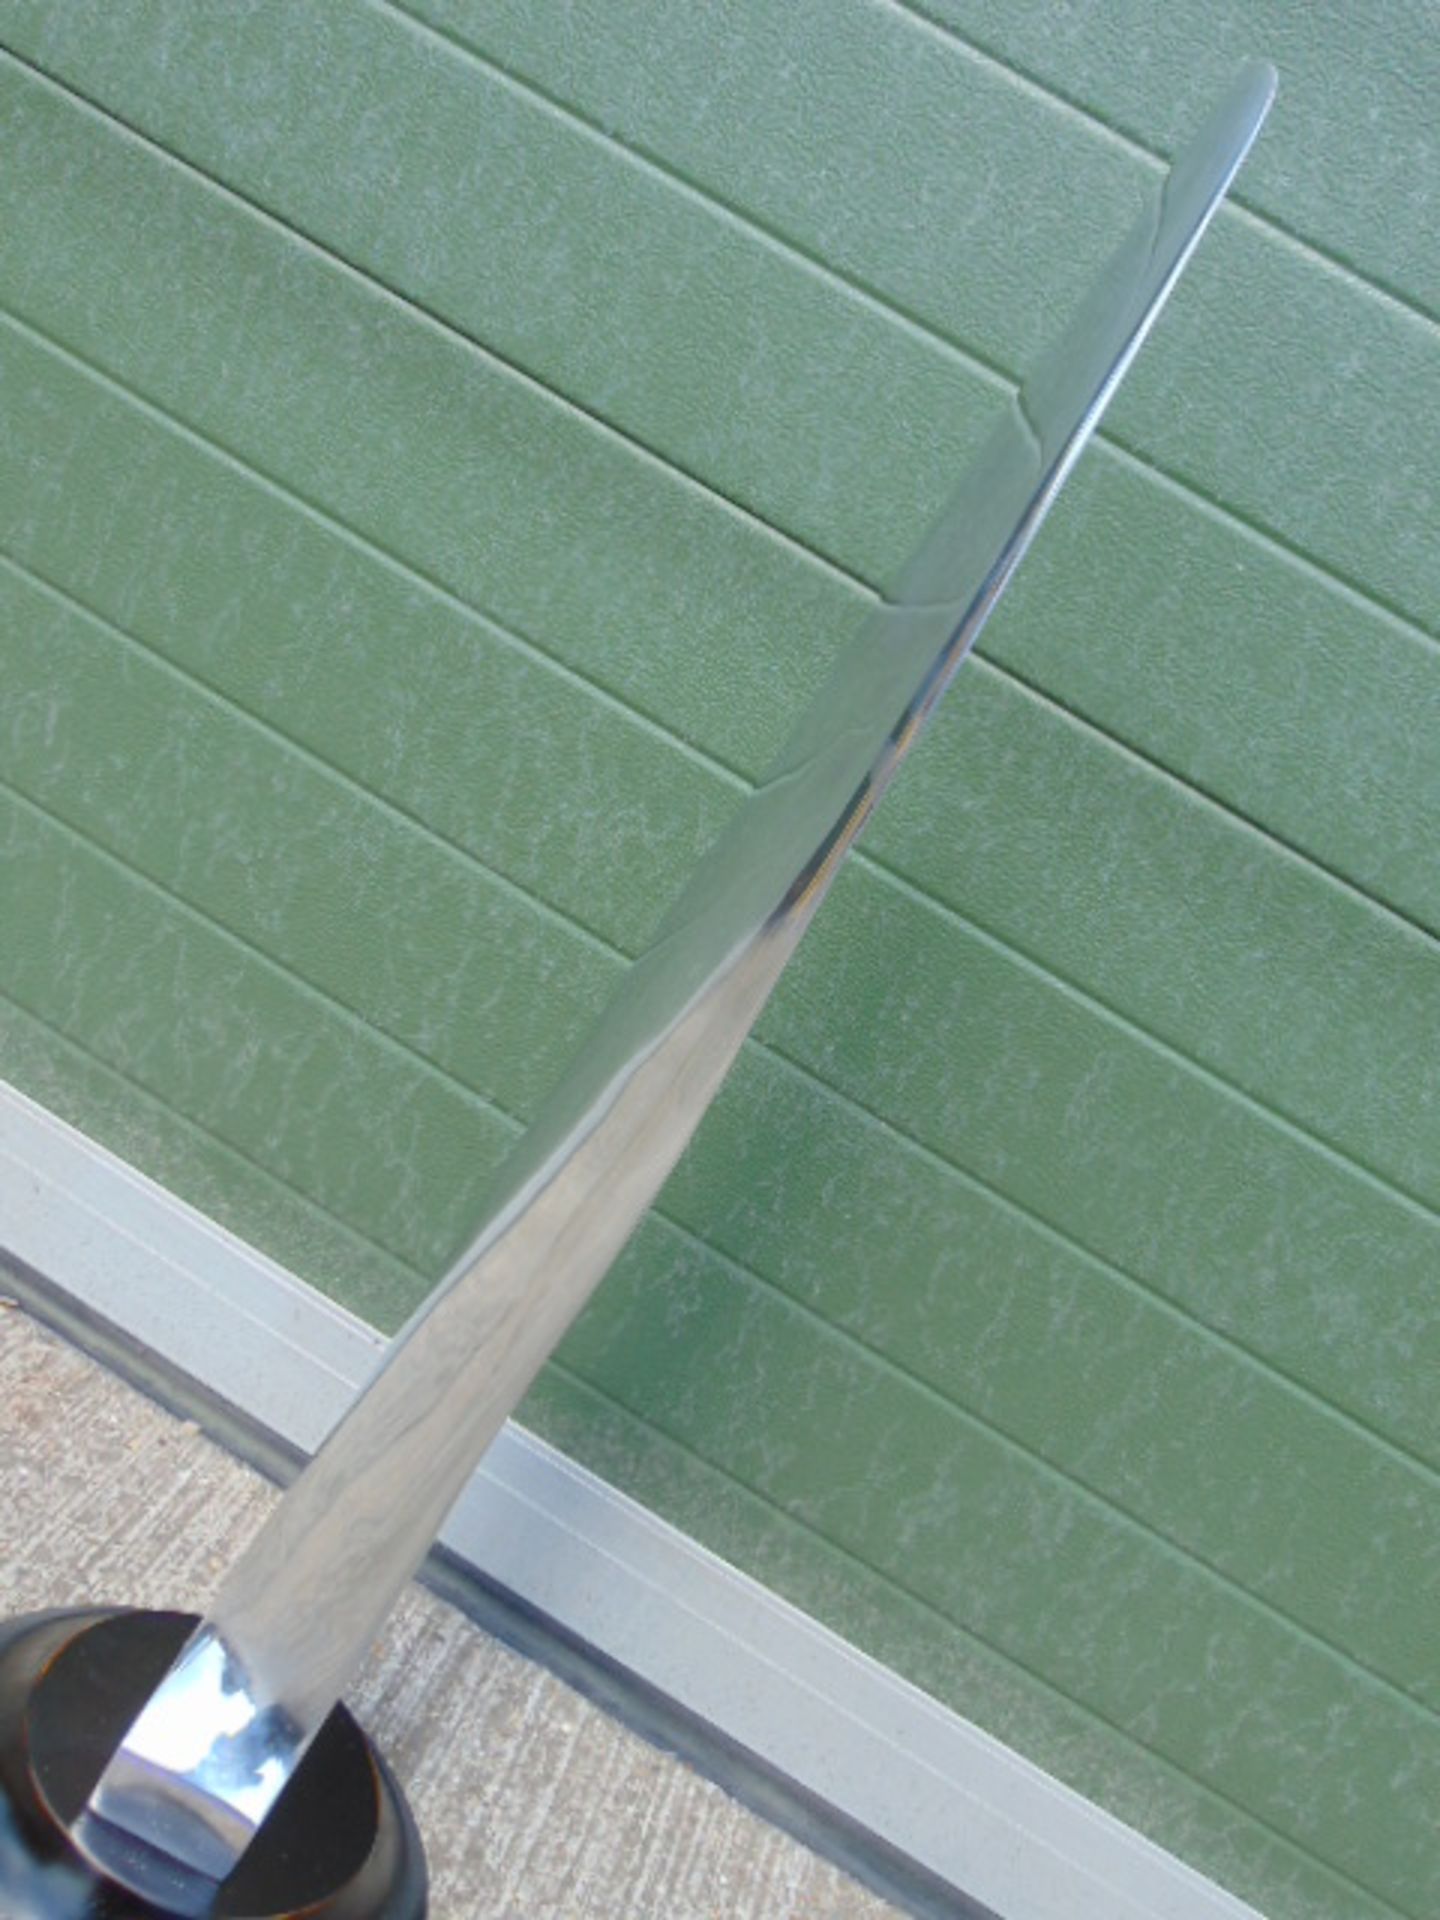 Polished Aluminium Propeller Blade on Stand - Image 4 of 6